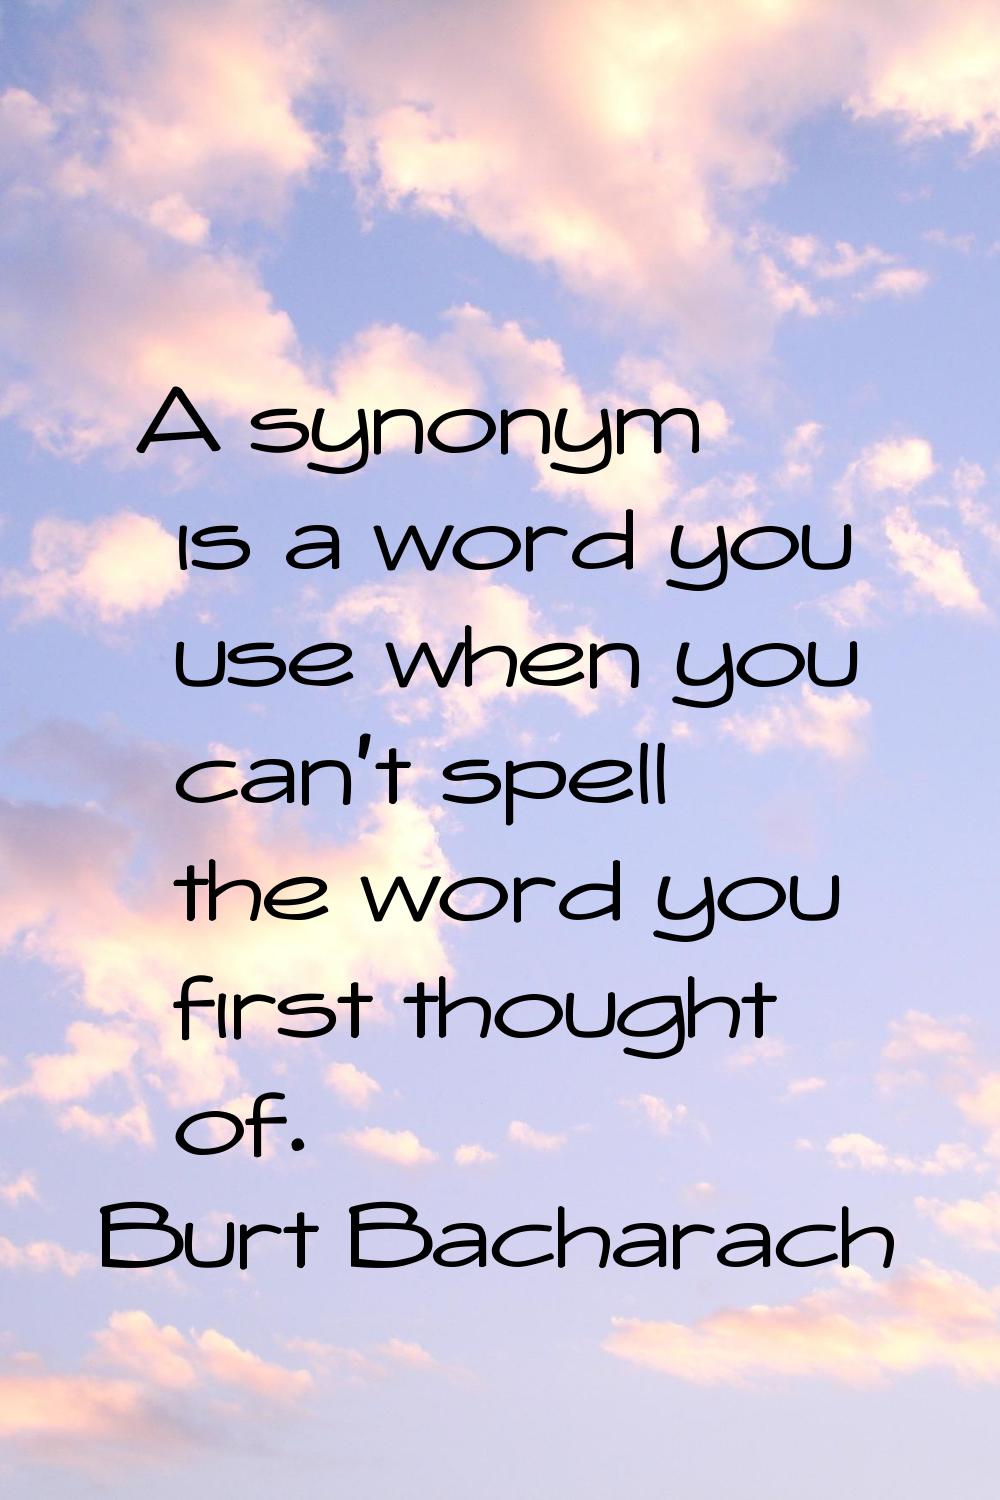 A synonym is a word you use when you can't spell the word you first thought of.